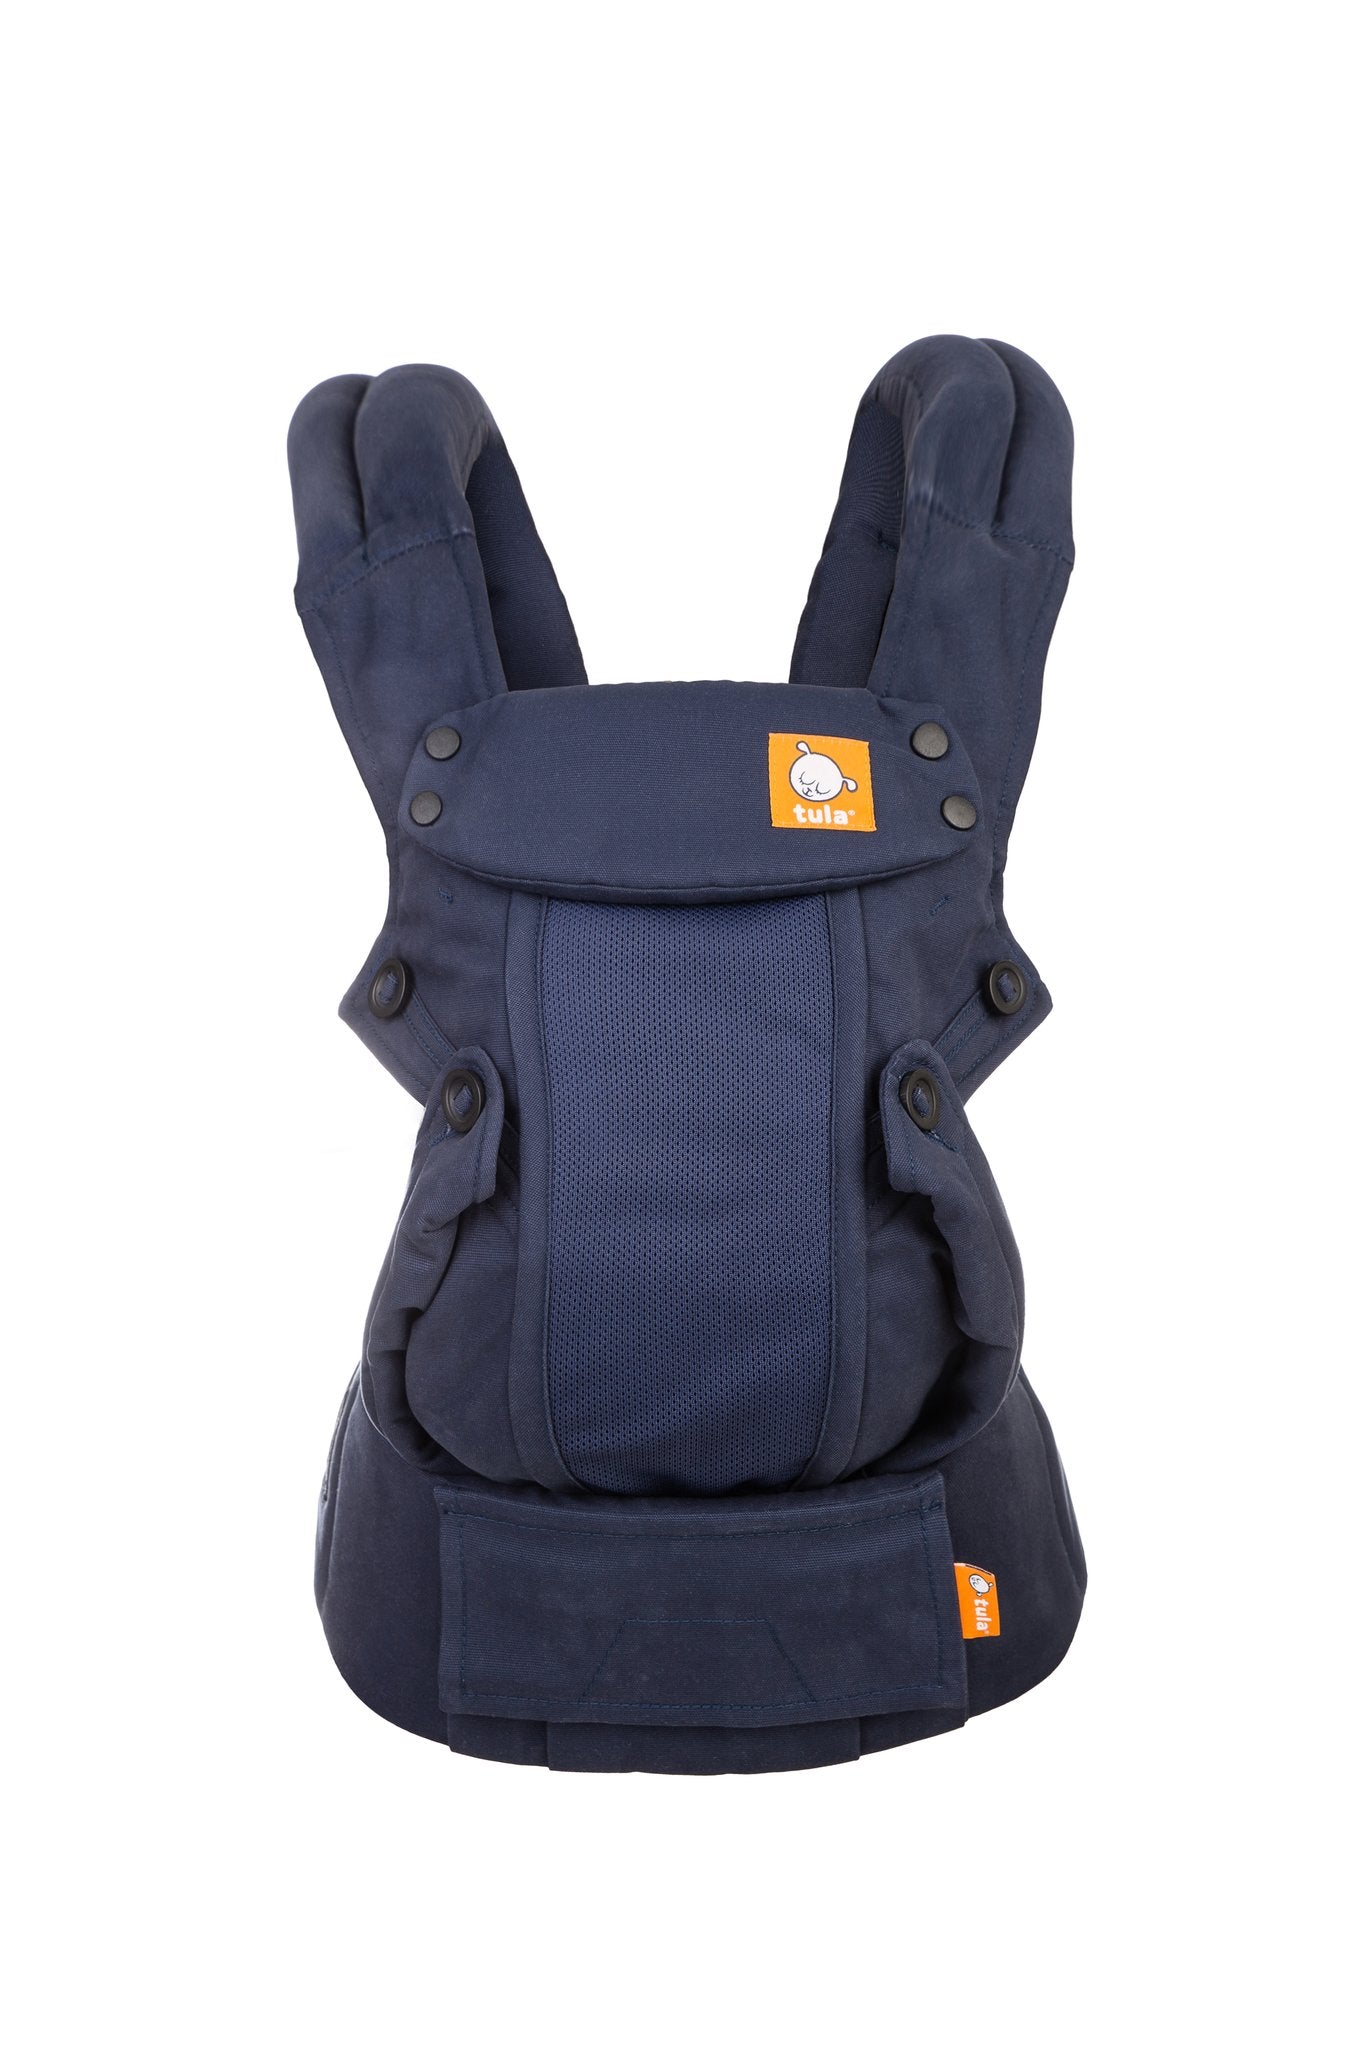 Tula Baby Carrier Navy Blue